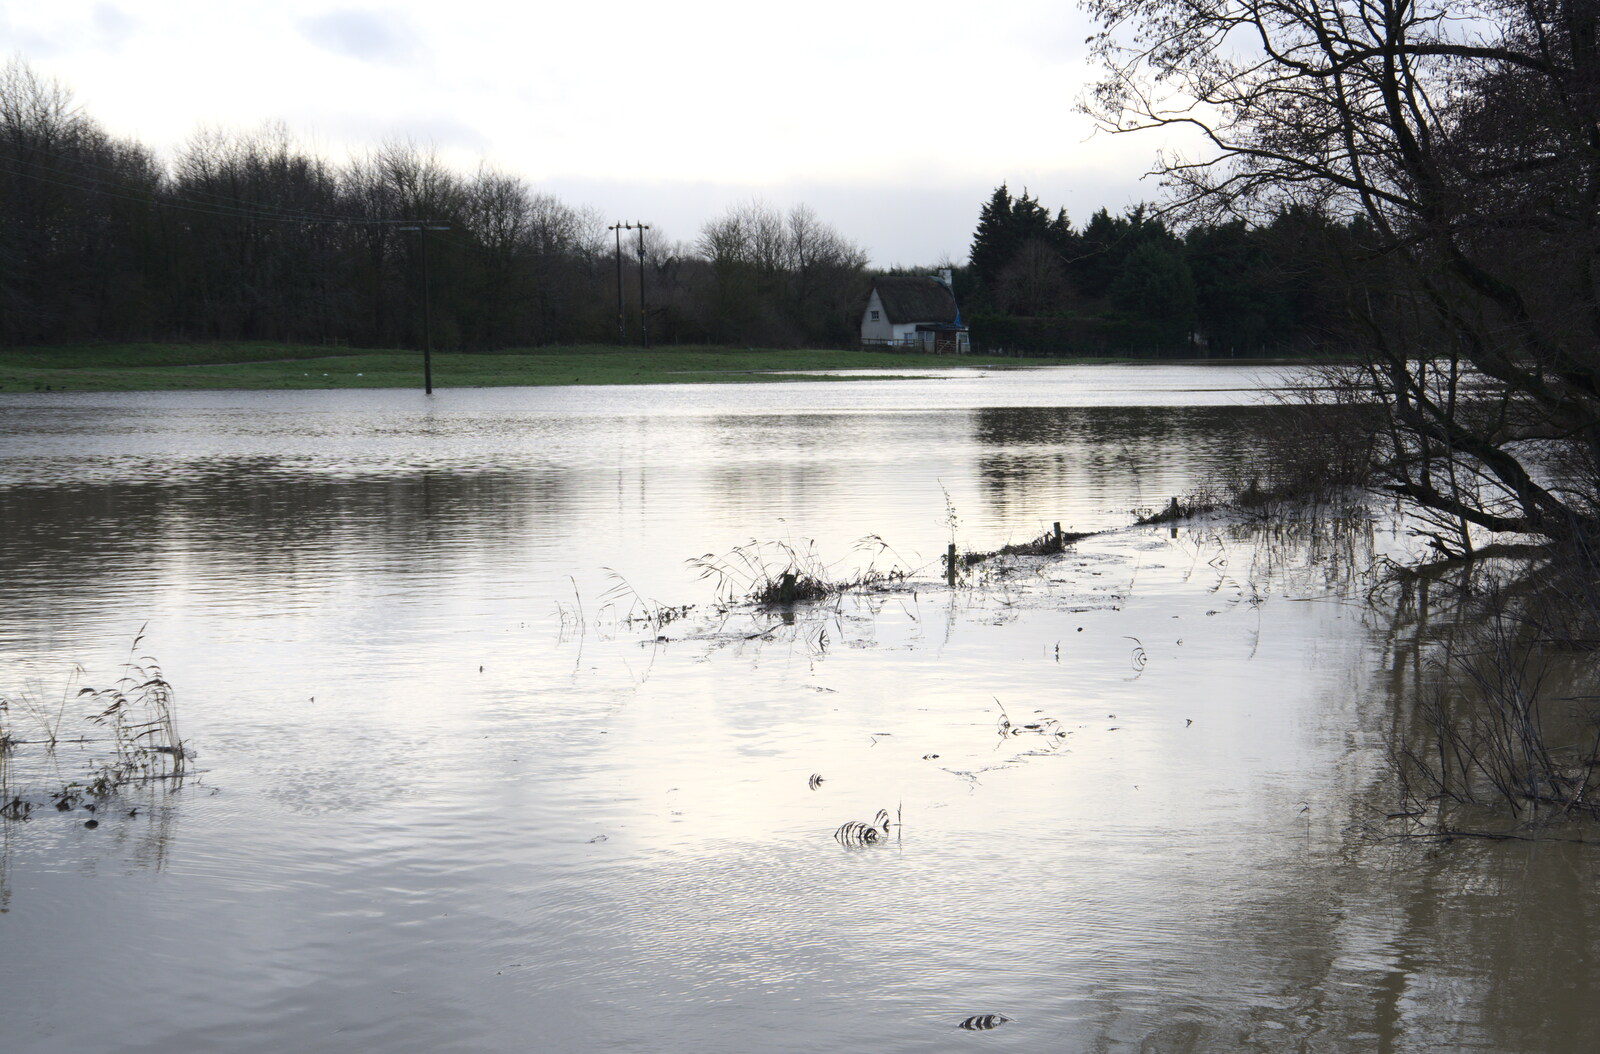 The meadow near the gold club from The Christmas Eve Floods, Diss, Norfolk - 24th December 2020